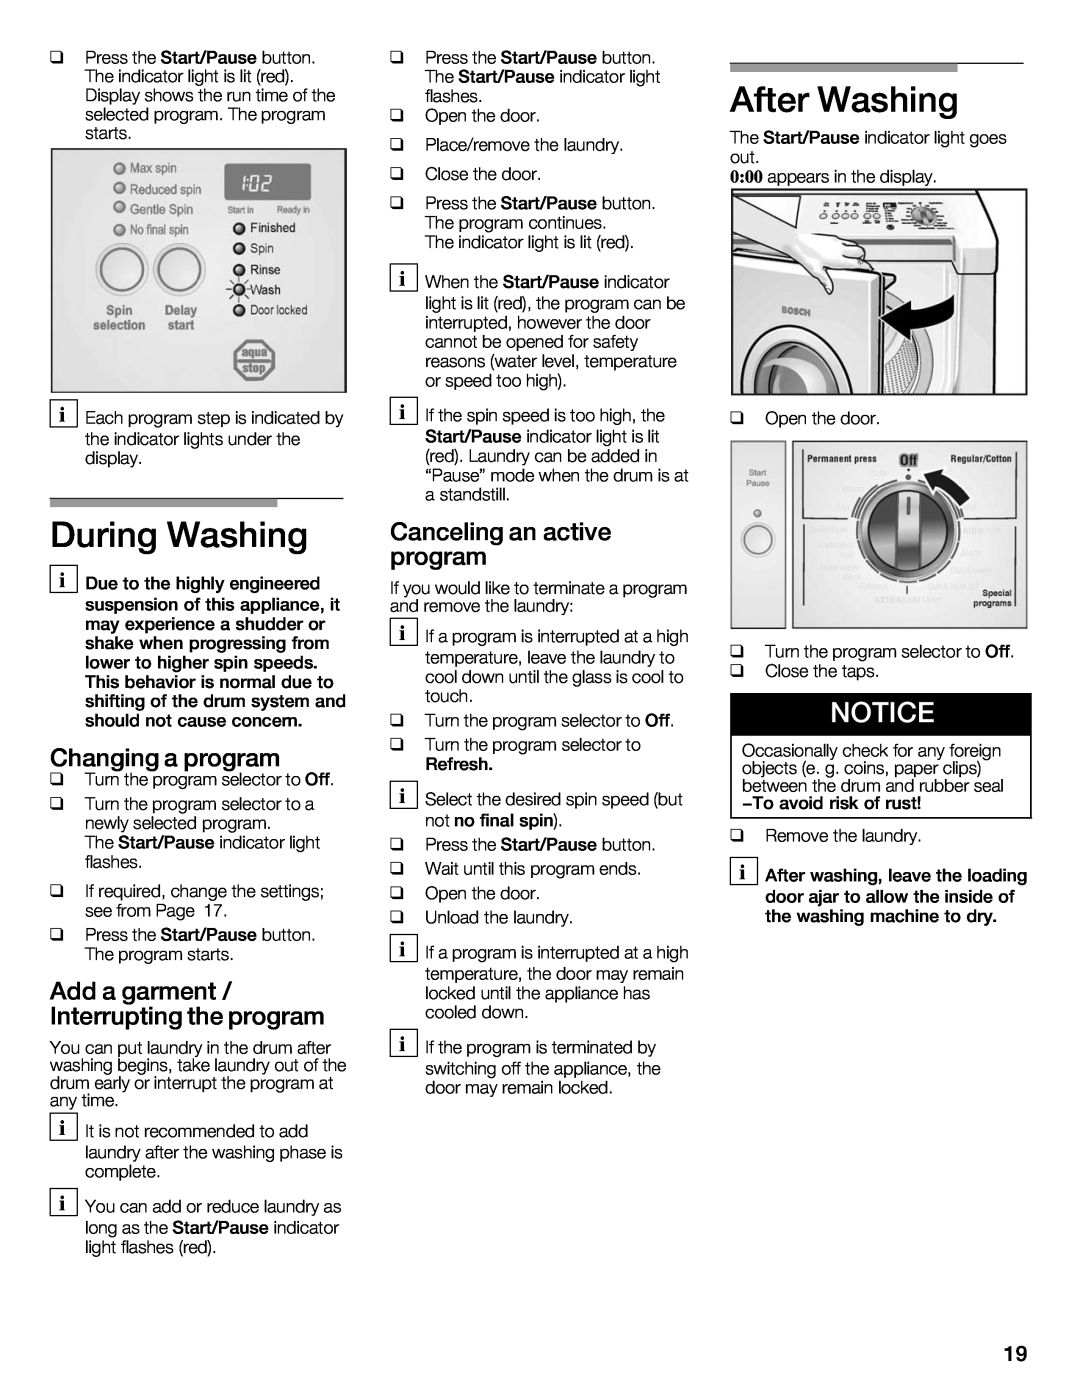 Bosch Appliances 500 Plus Series manual After Washing, During Washing, Canceling an active, Changing a program 